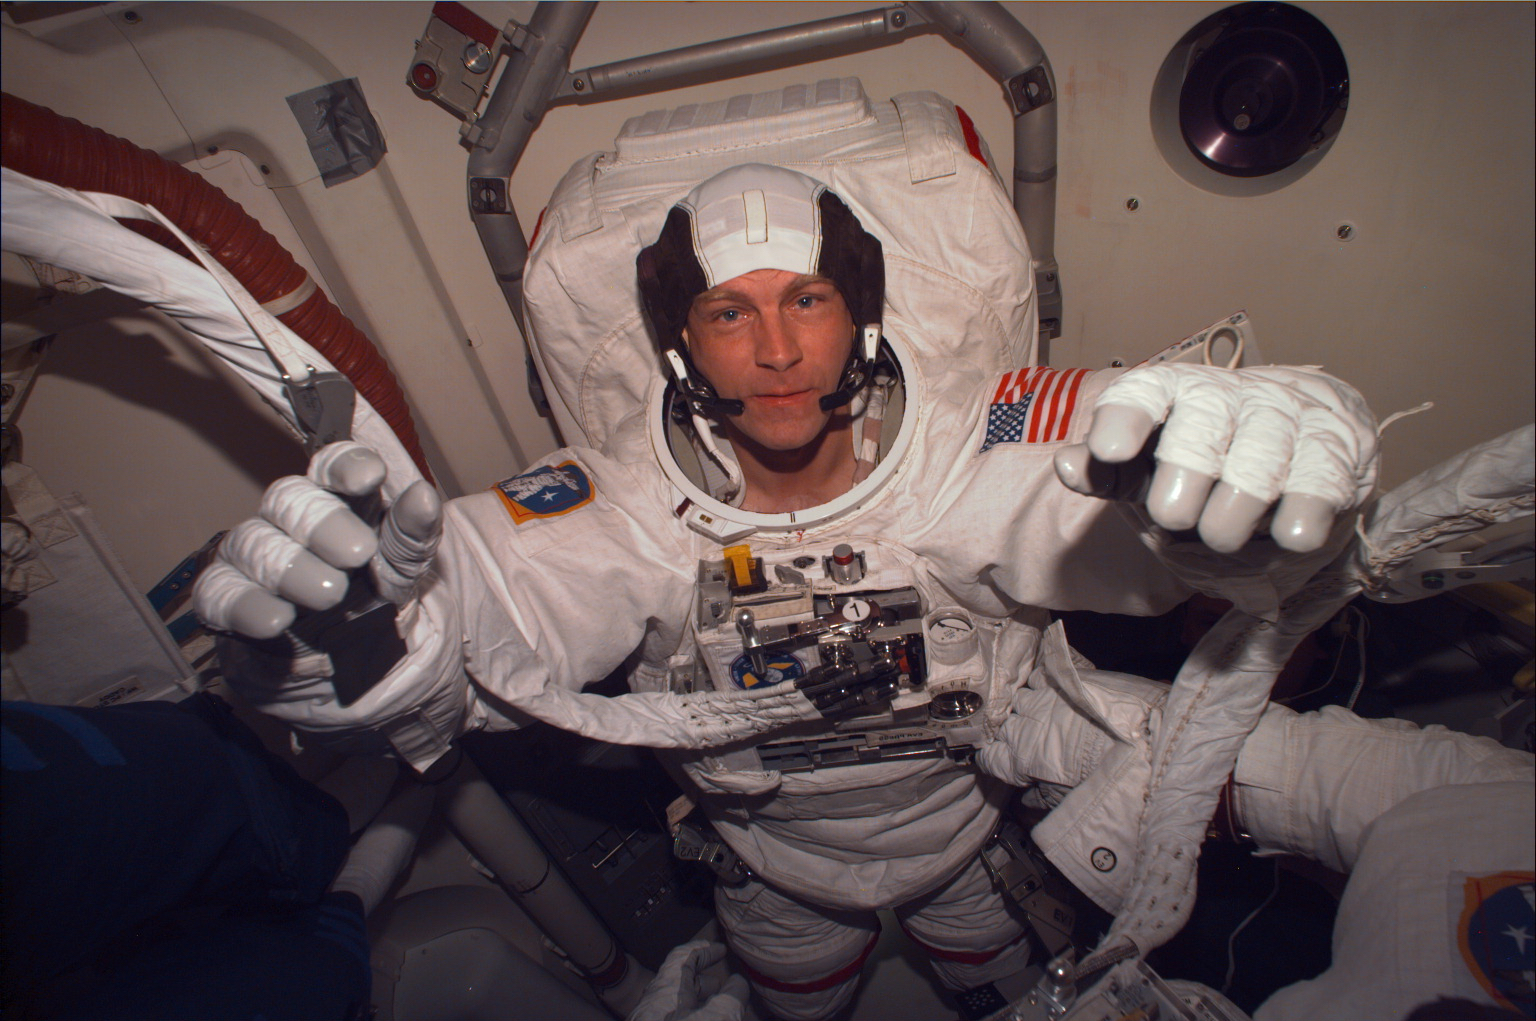 An astronaut starts to unsuit in the crew compartment after a spacewalk.